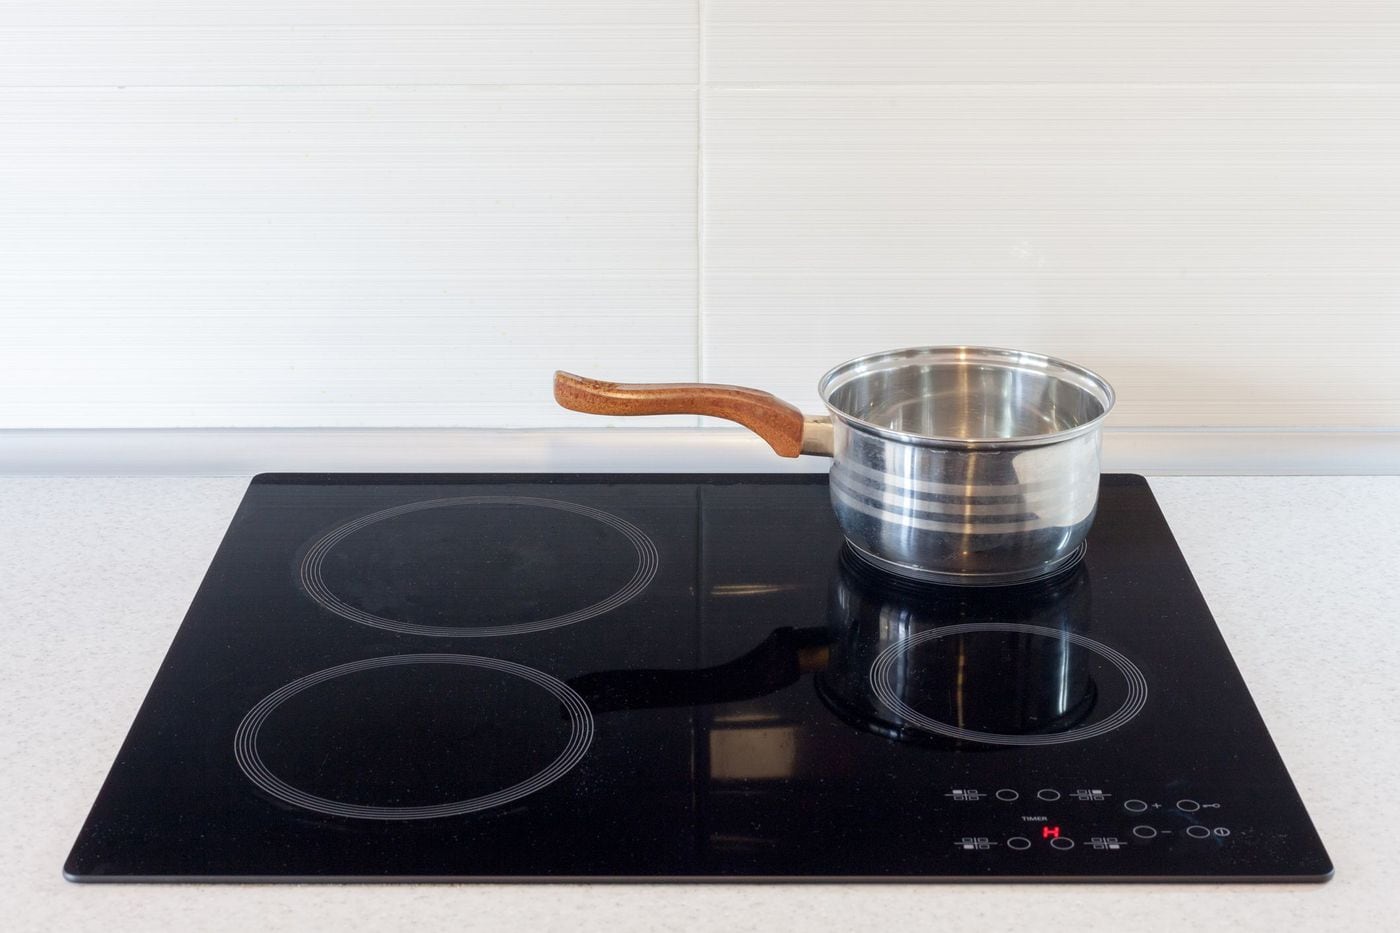 black hotpoint stove magnetic oven manual